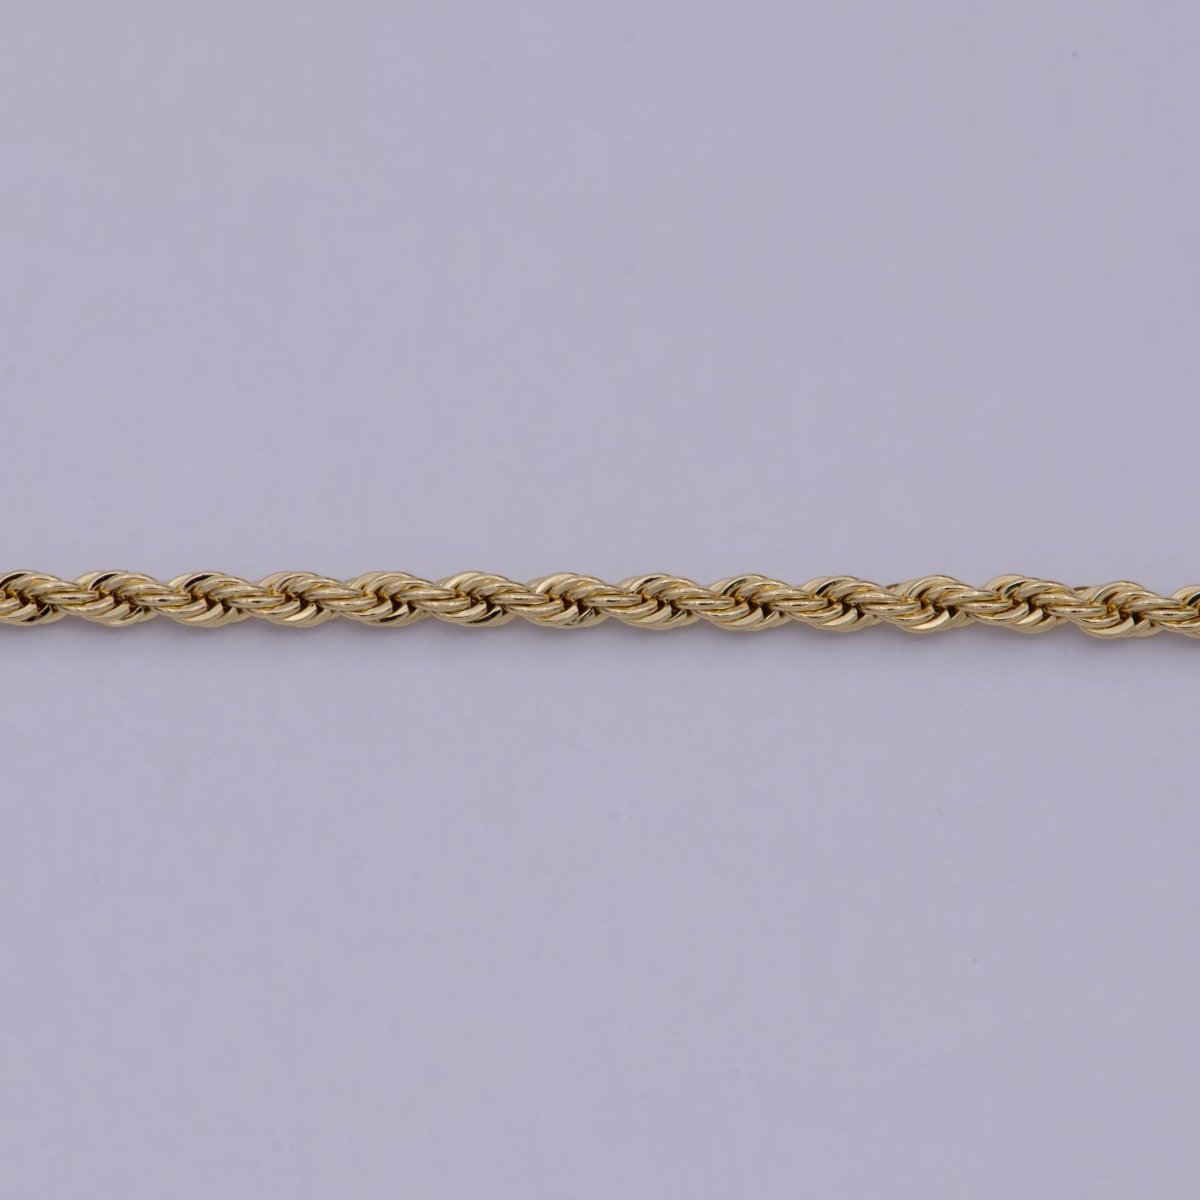 24K Gold Filled Rope Chain by Yard, Gold Twisted Chain by Yard